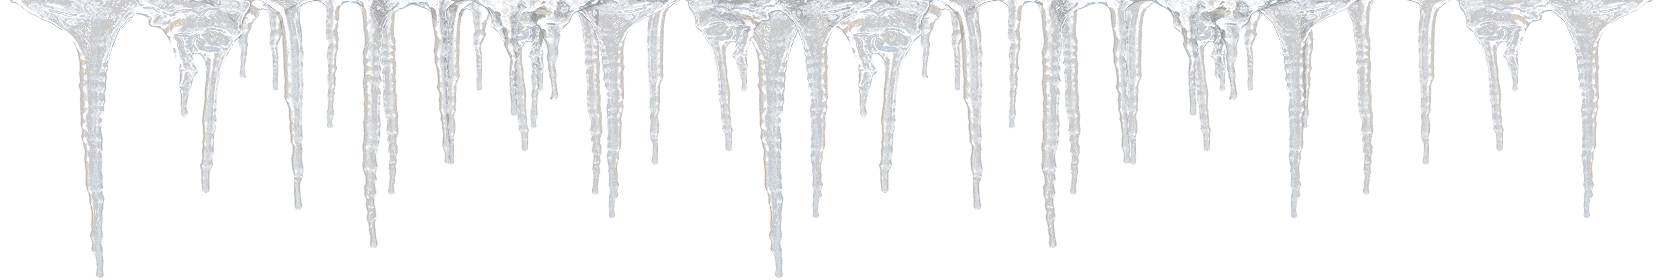 Icicles PNG free images download, icicle PNG.